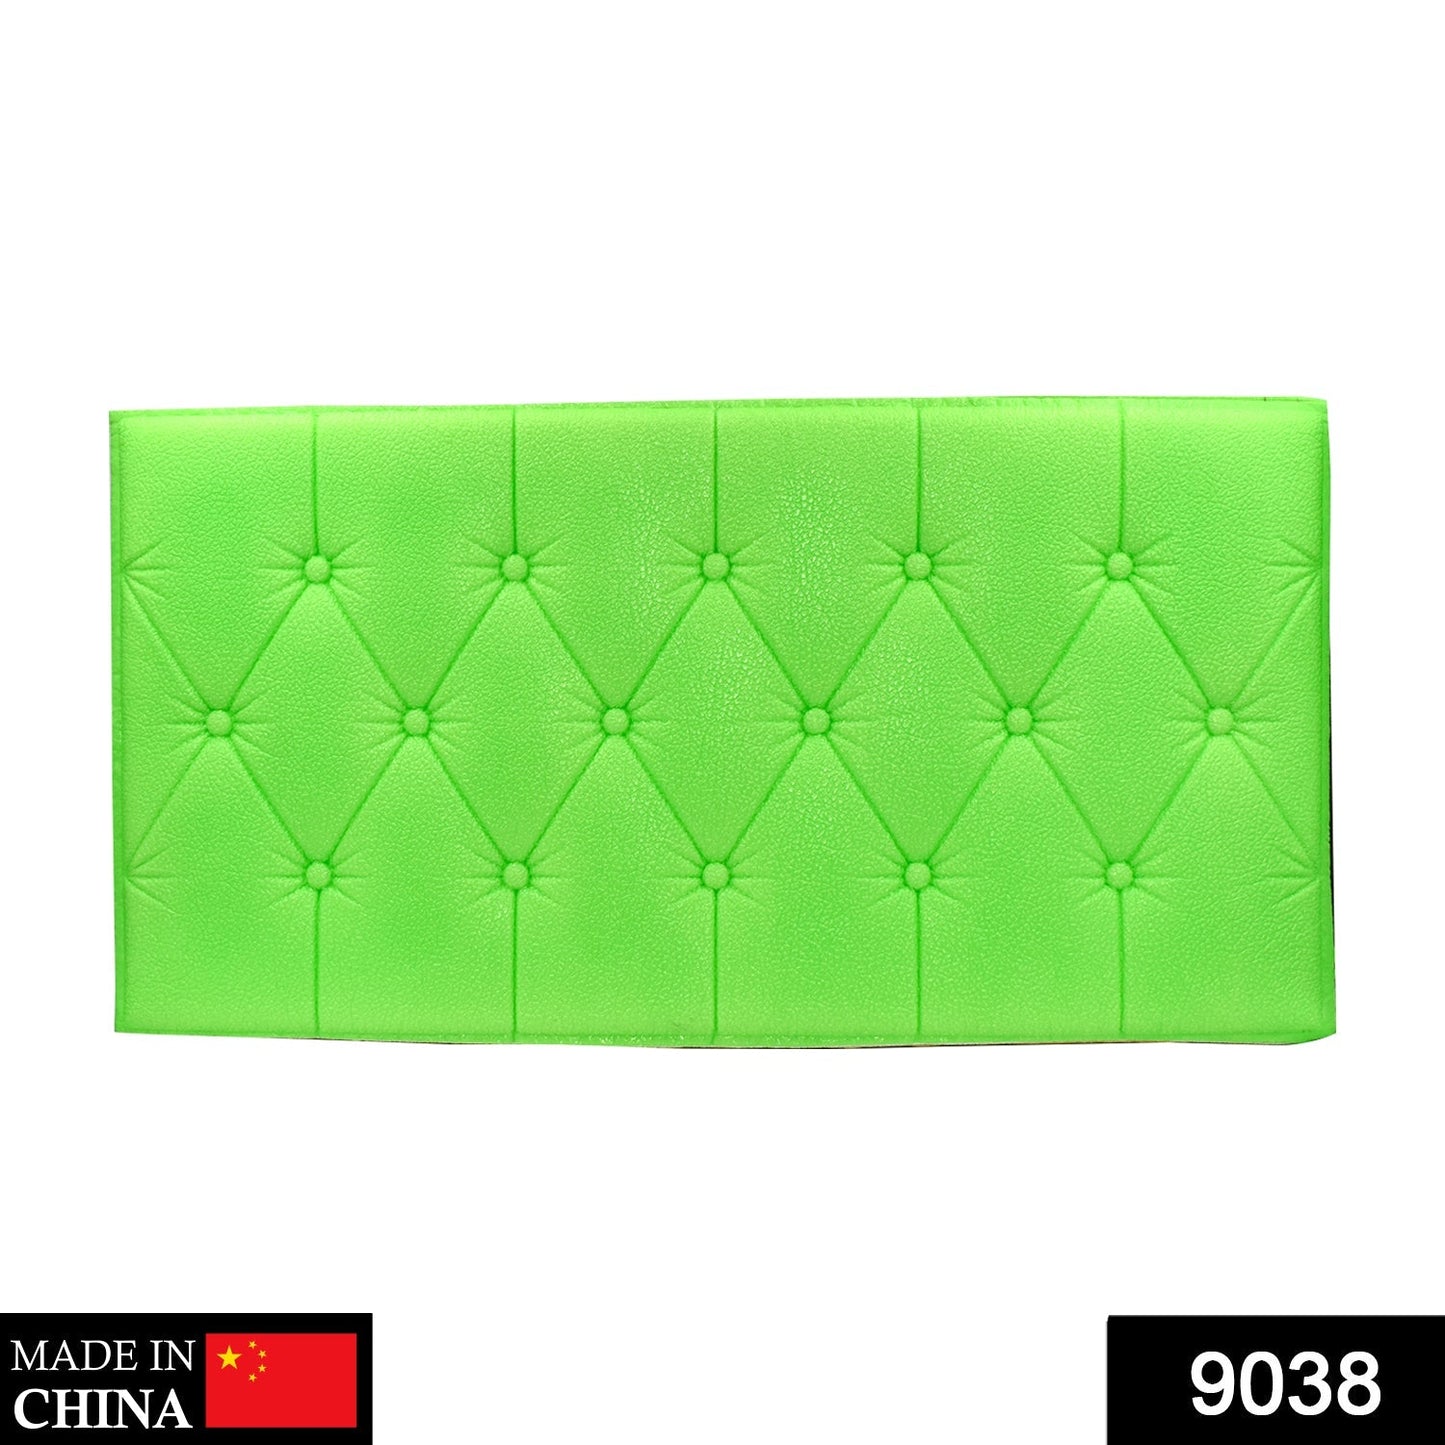 9038 Green 3D Adhesive wallpaper for living Room. Room Wall Paper Home Decor Self Adhesive Wallpaper